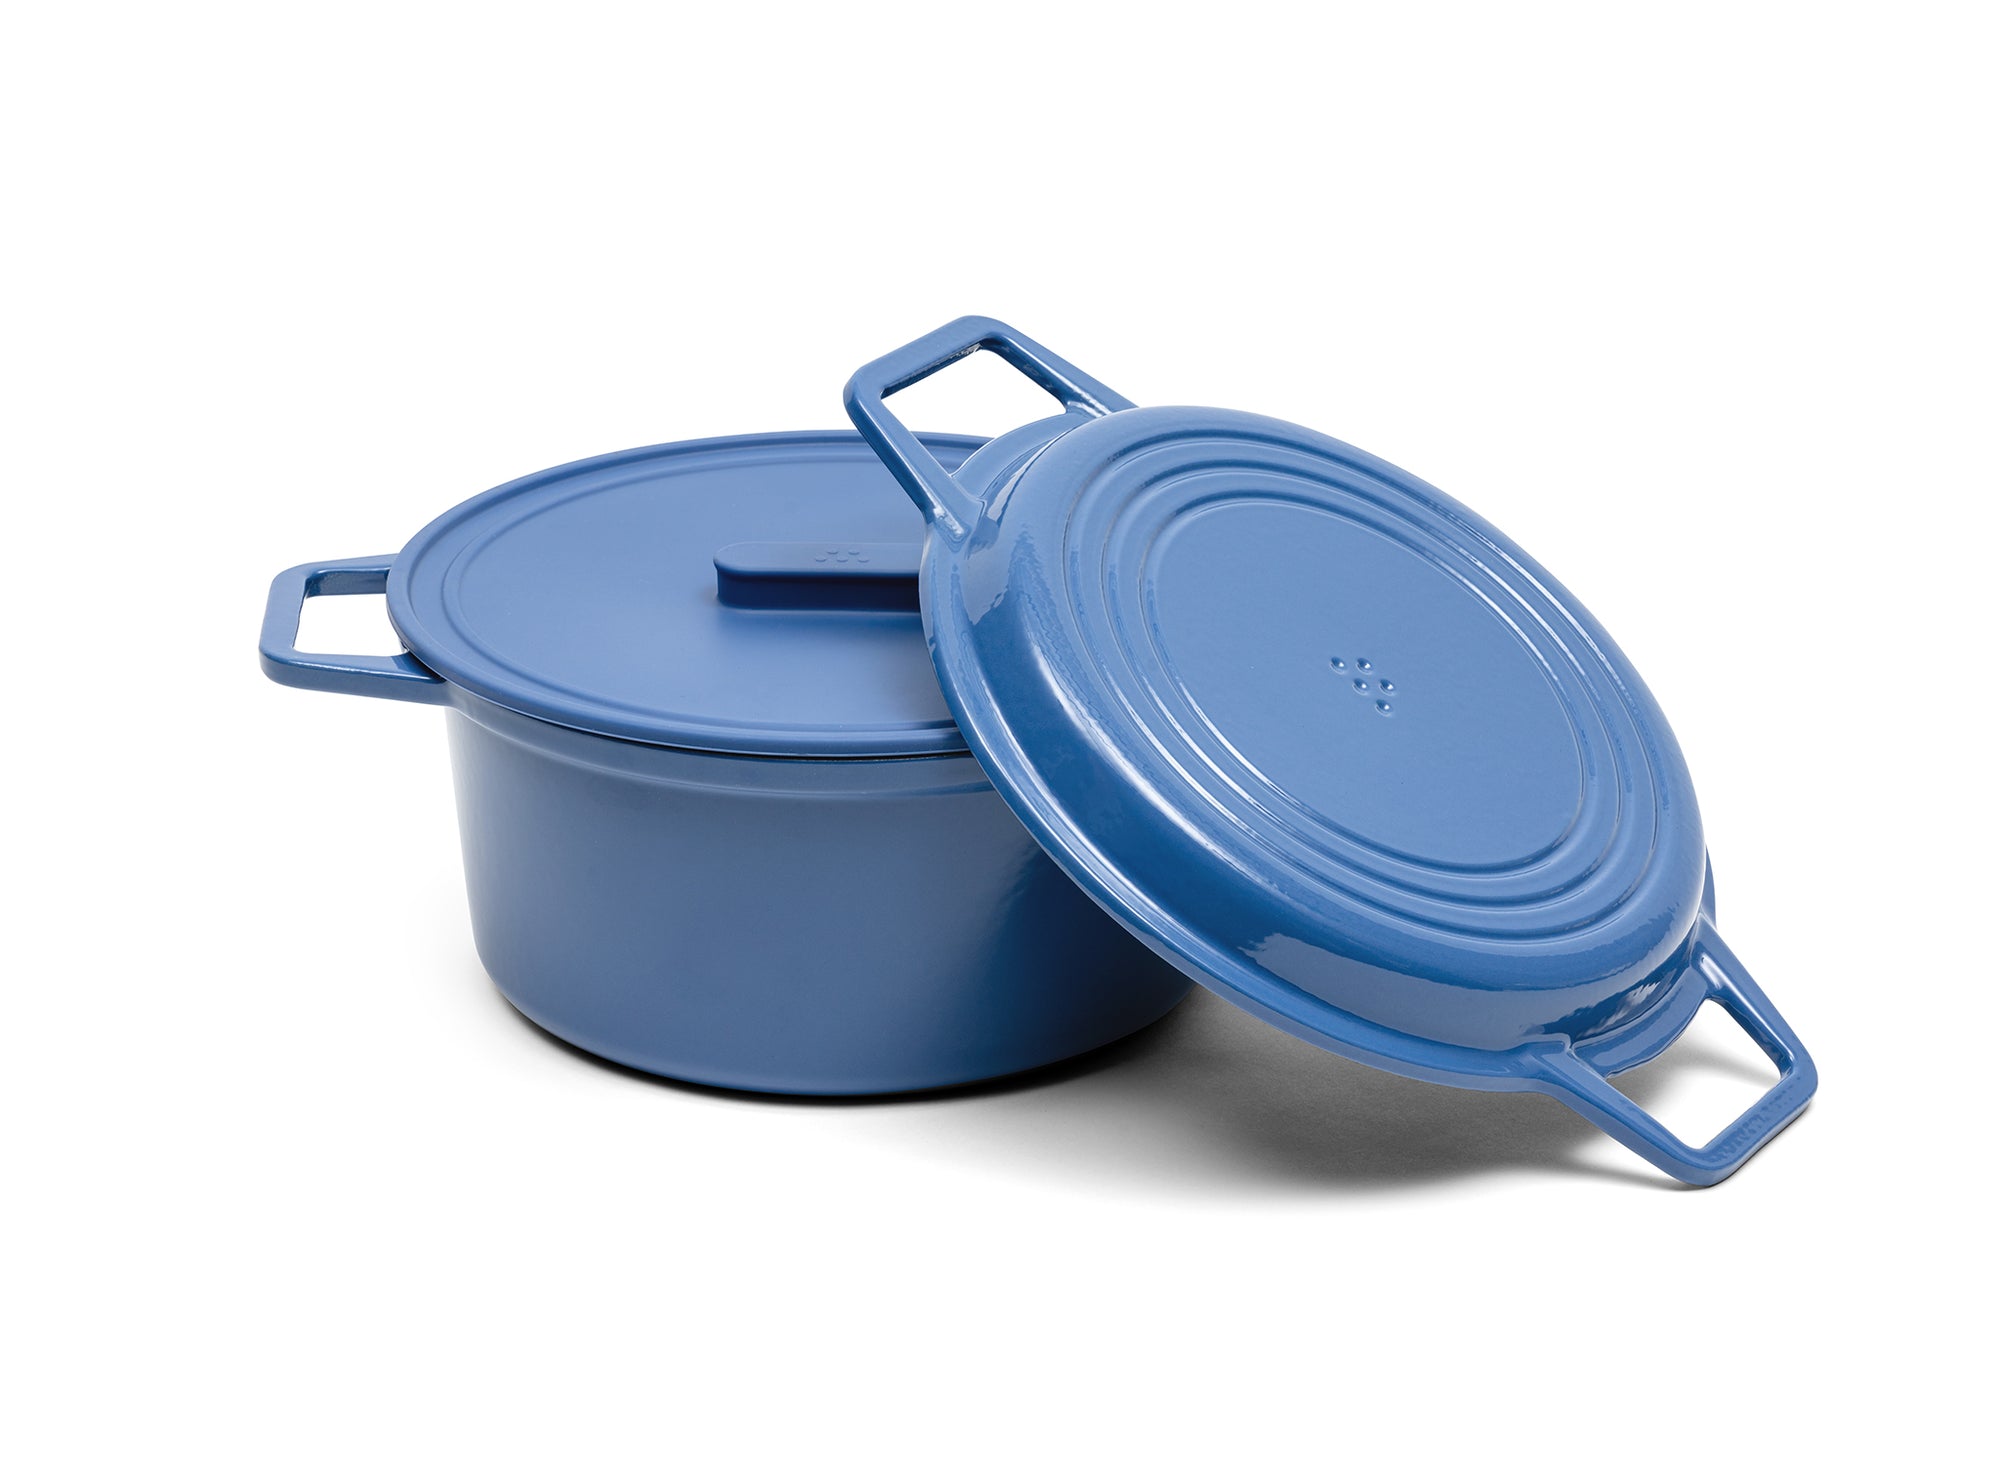 A blue 7-quart Misen Dutch Oven with matching Grill Lid and silicone Universal Lid.